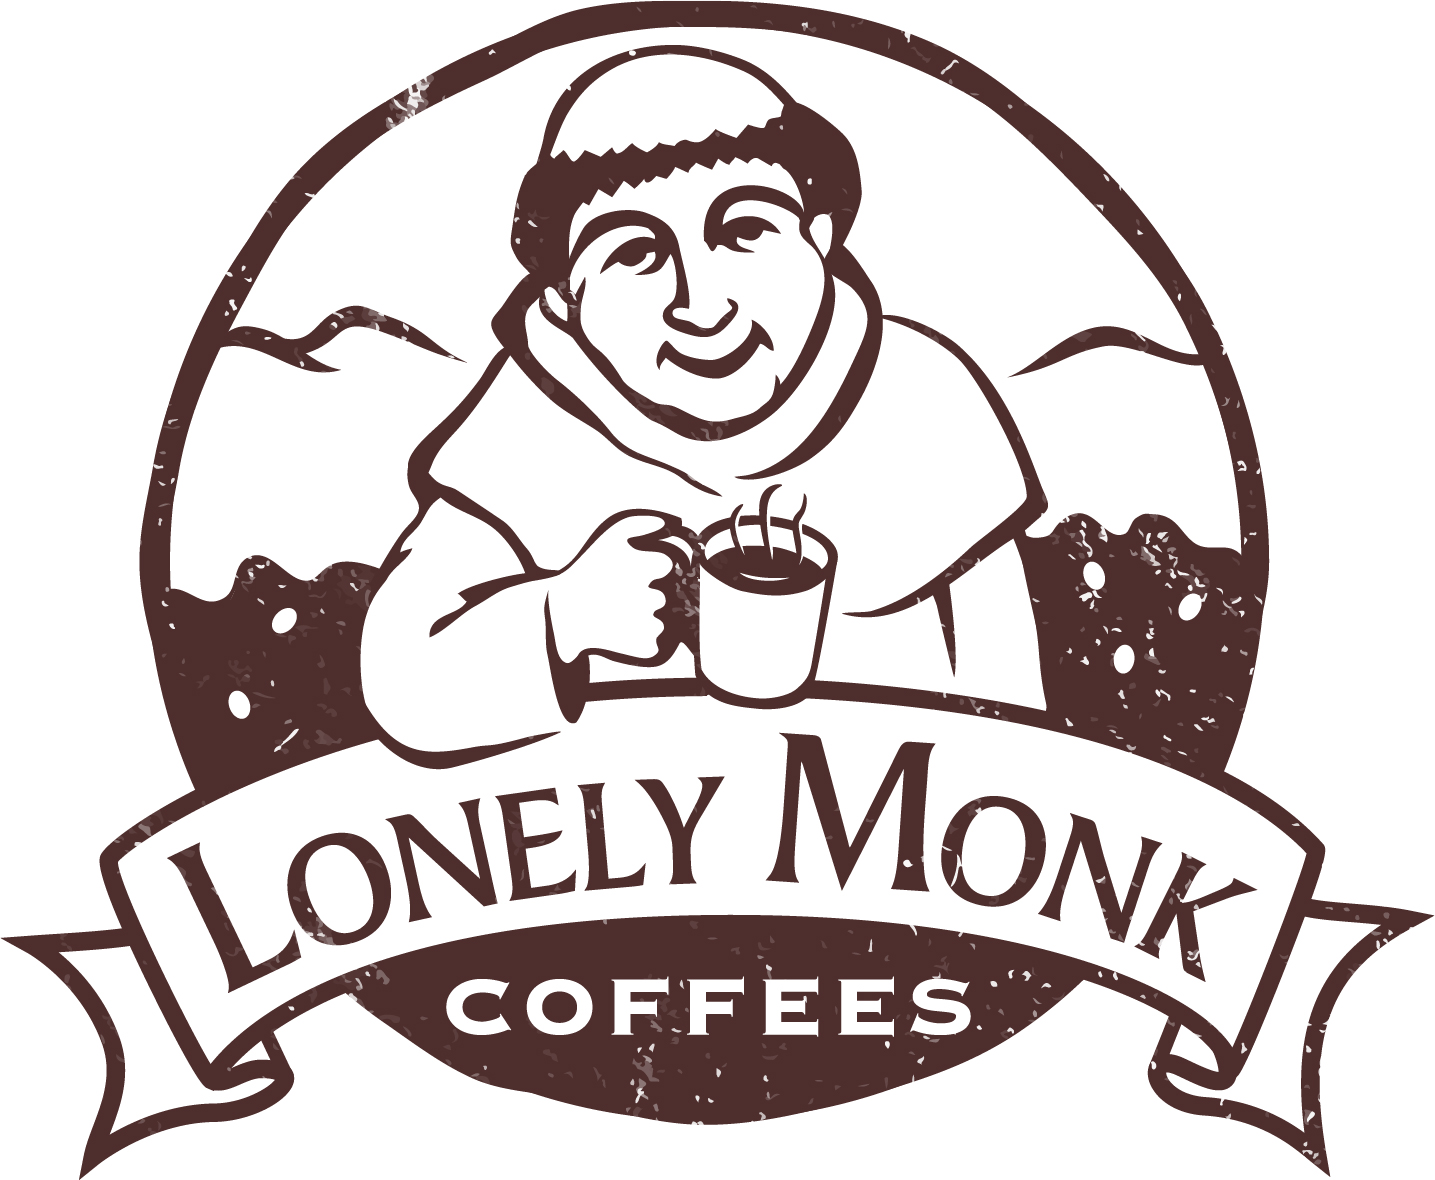 Lonely Monk Coffee Roasting